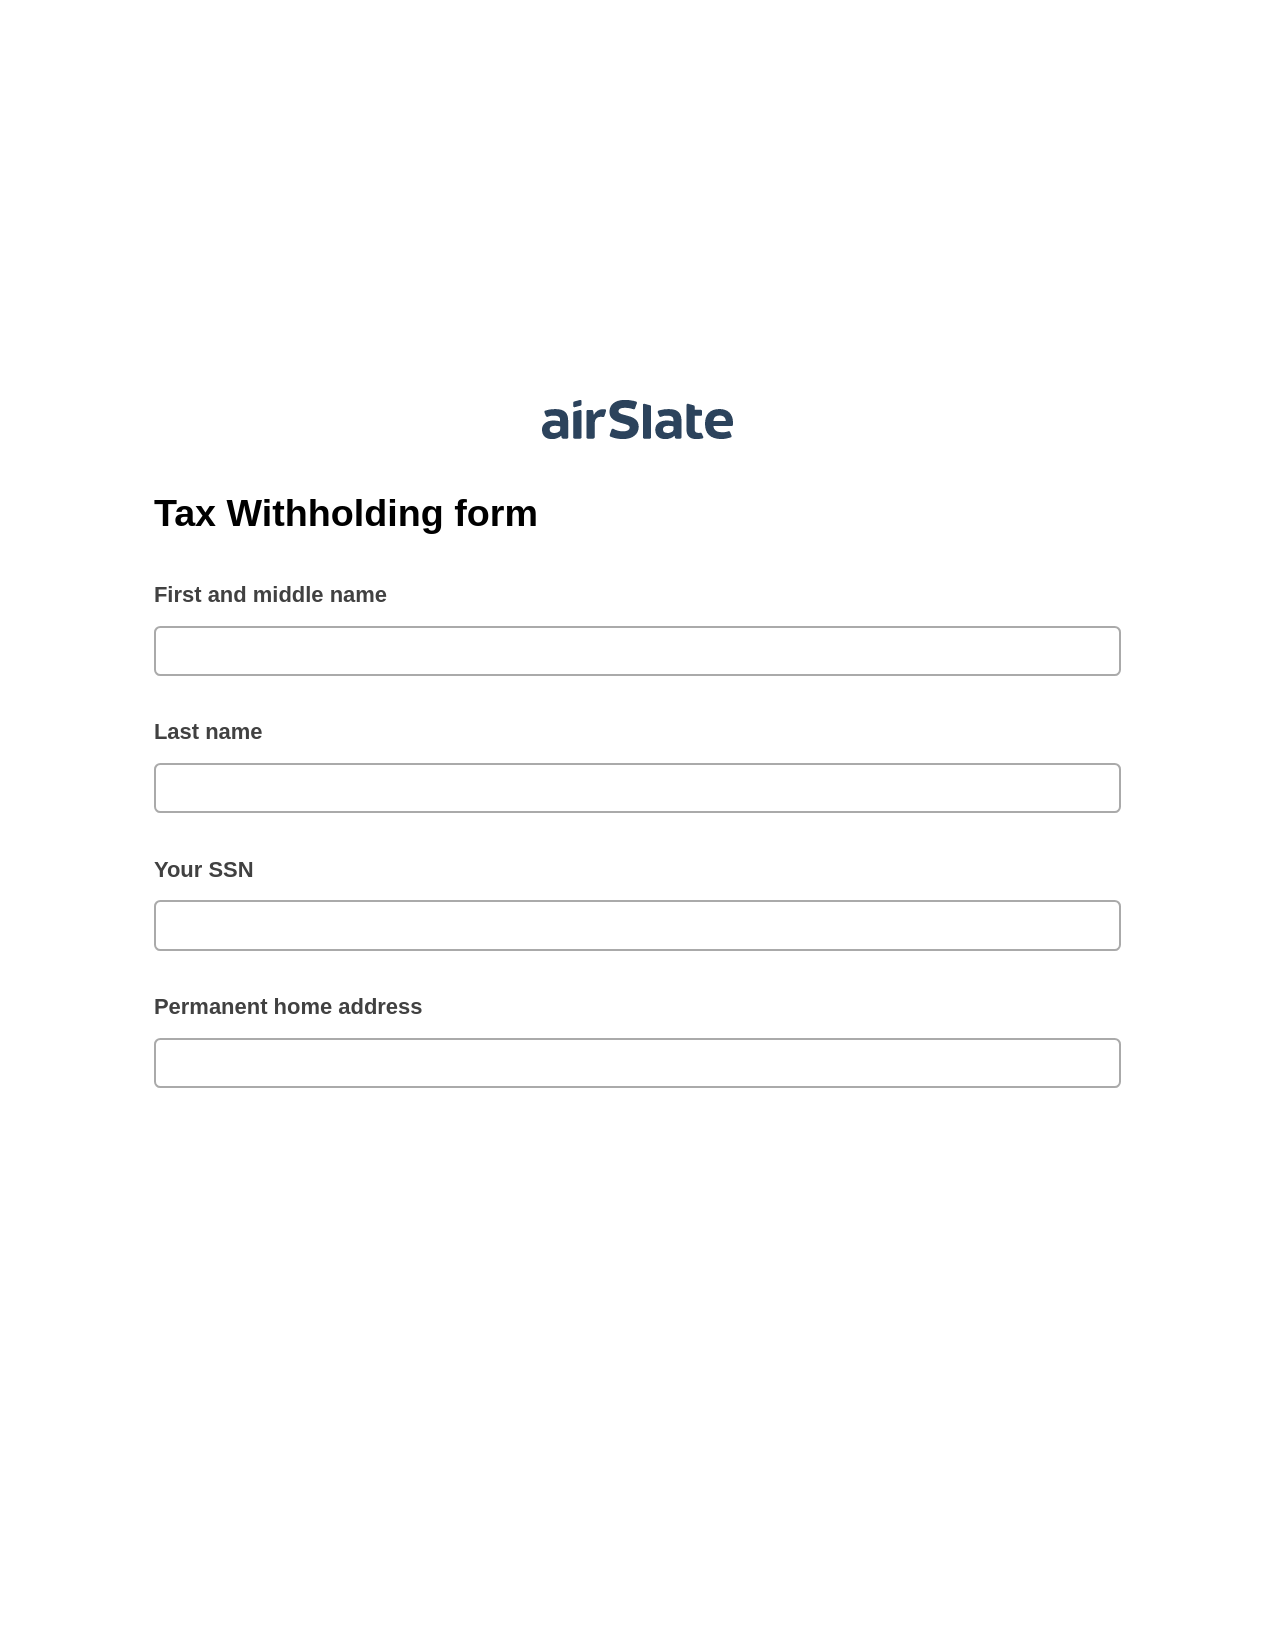 Multirole Tax Withholding form Pre-fill from Excel Spreadsheet Bot, Remove Slate Bot, Export to Formstack Documents Bot